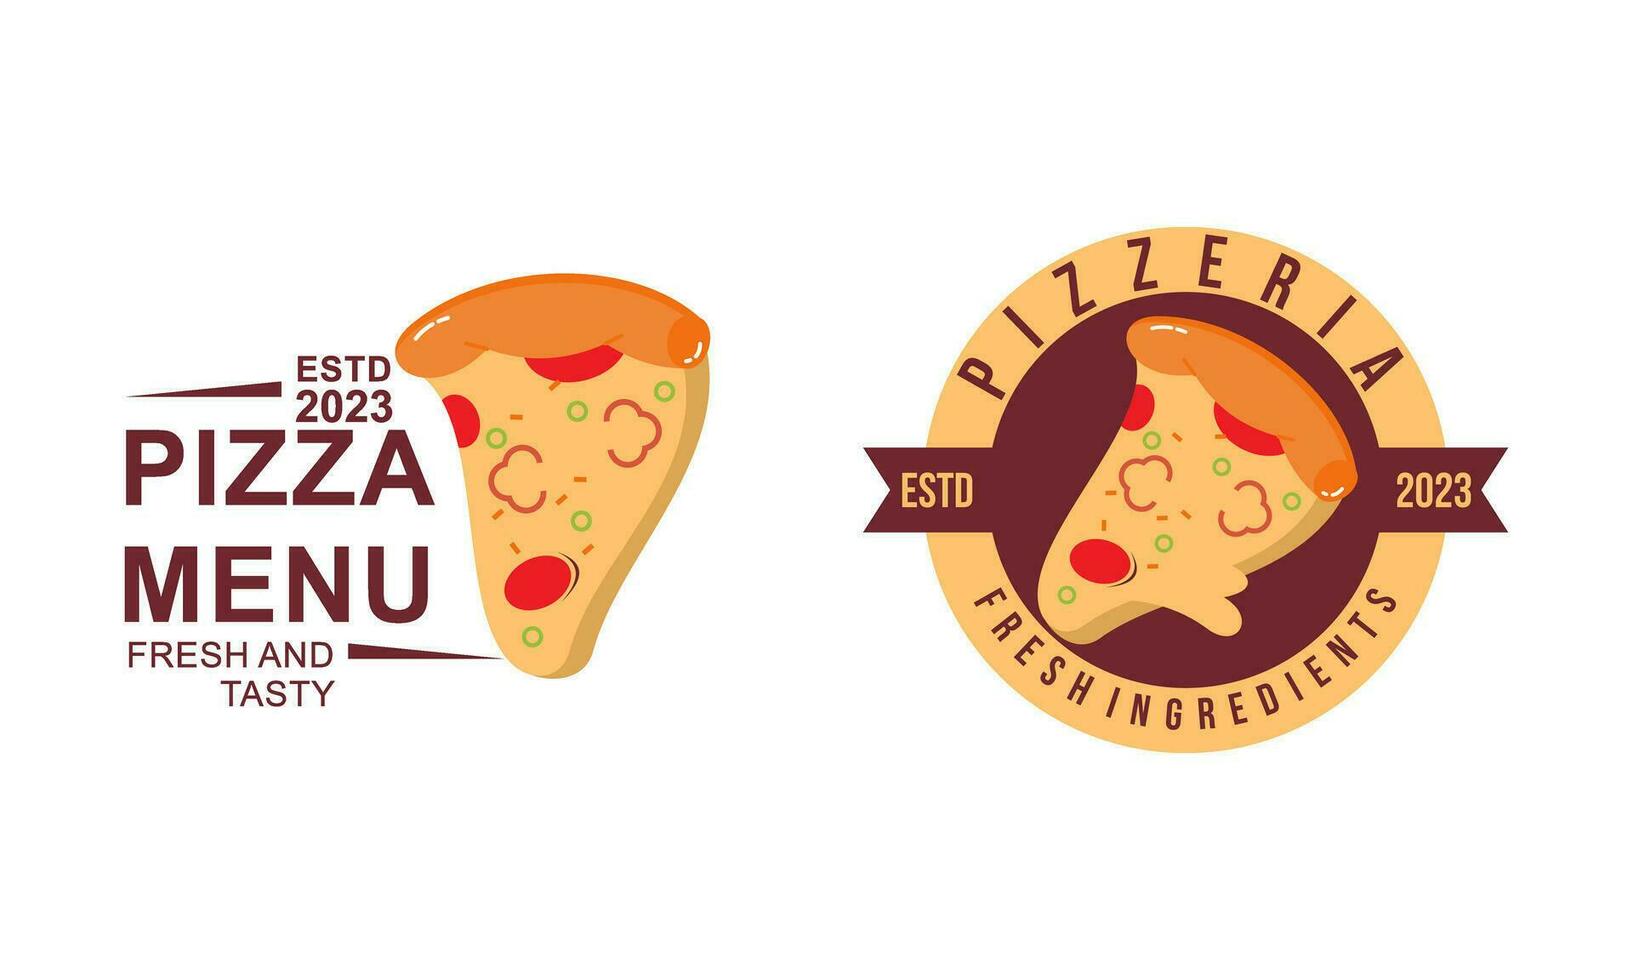 Pizza logo, icons and design elements for pizzeria vector